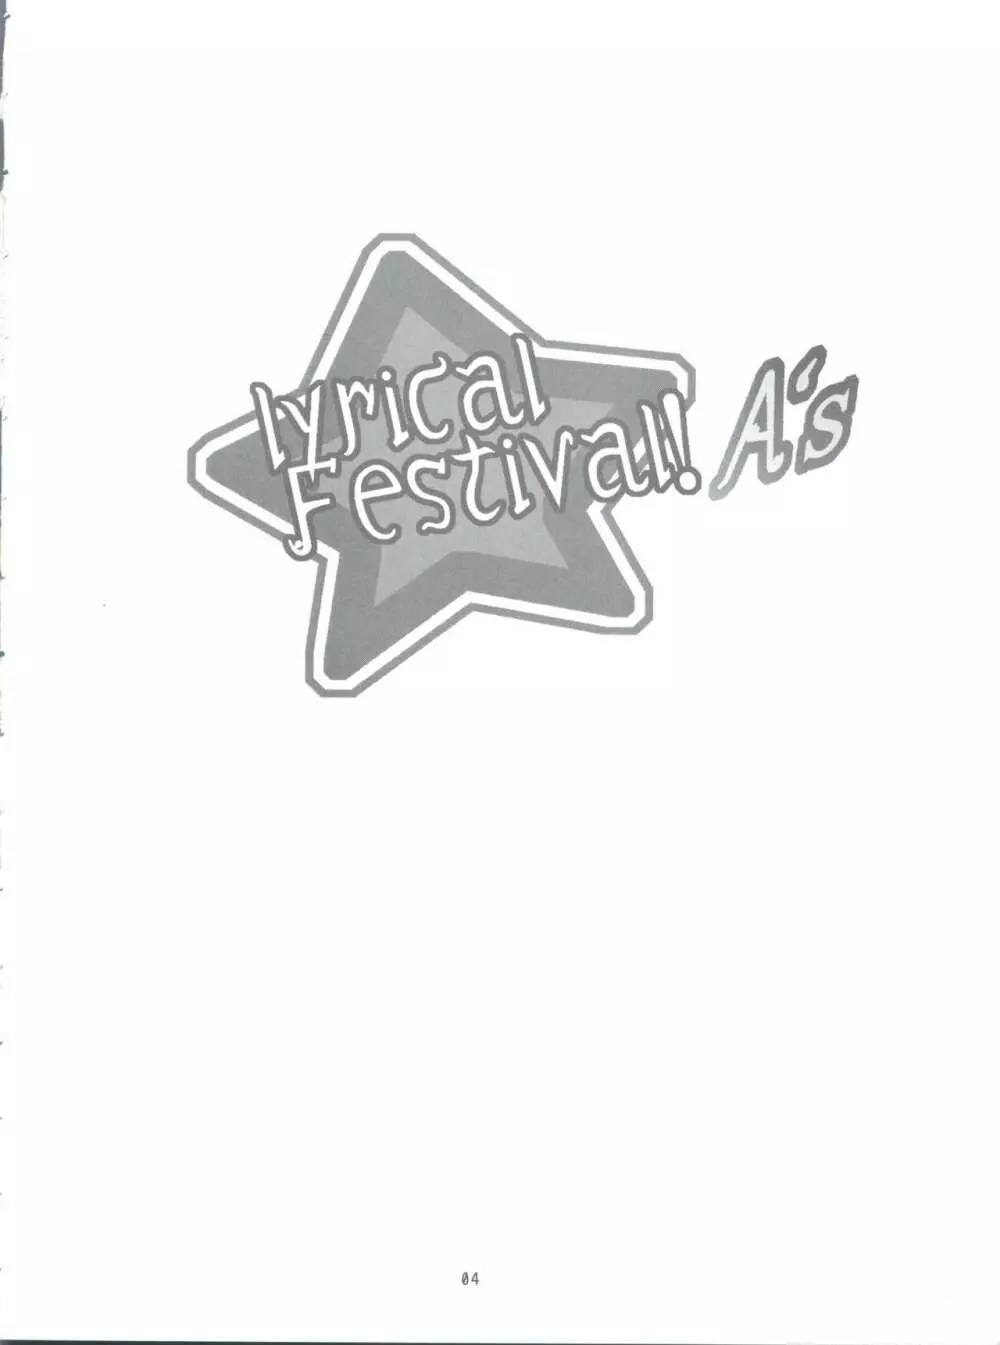 lyrical Festival! A's Page.3